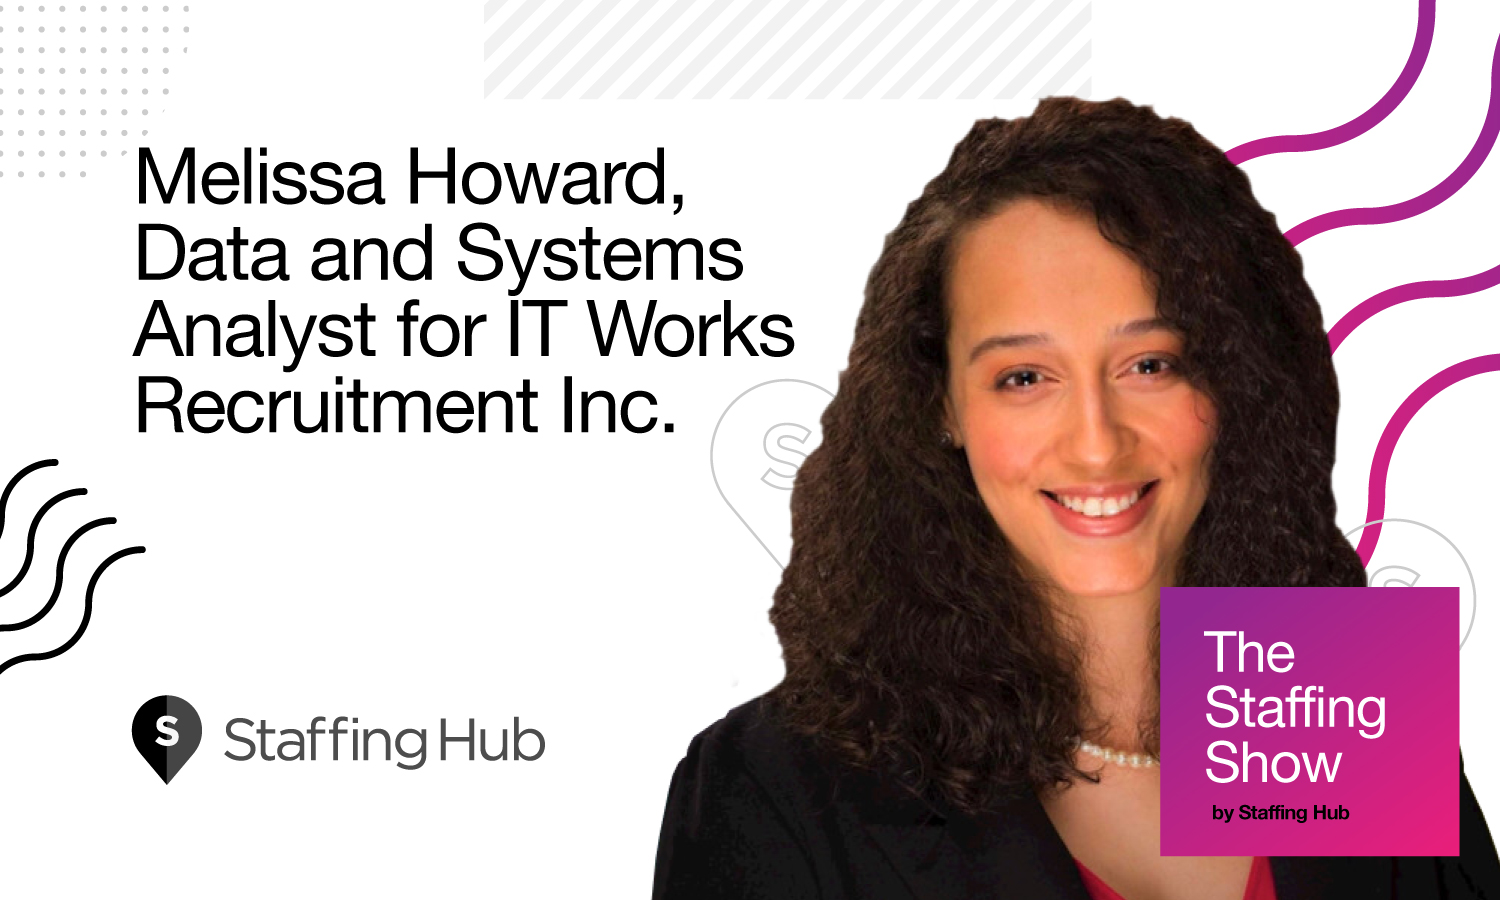 The Staffing Show - Episode 3 - Melissa Howard of IT Works Recruitment